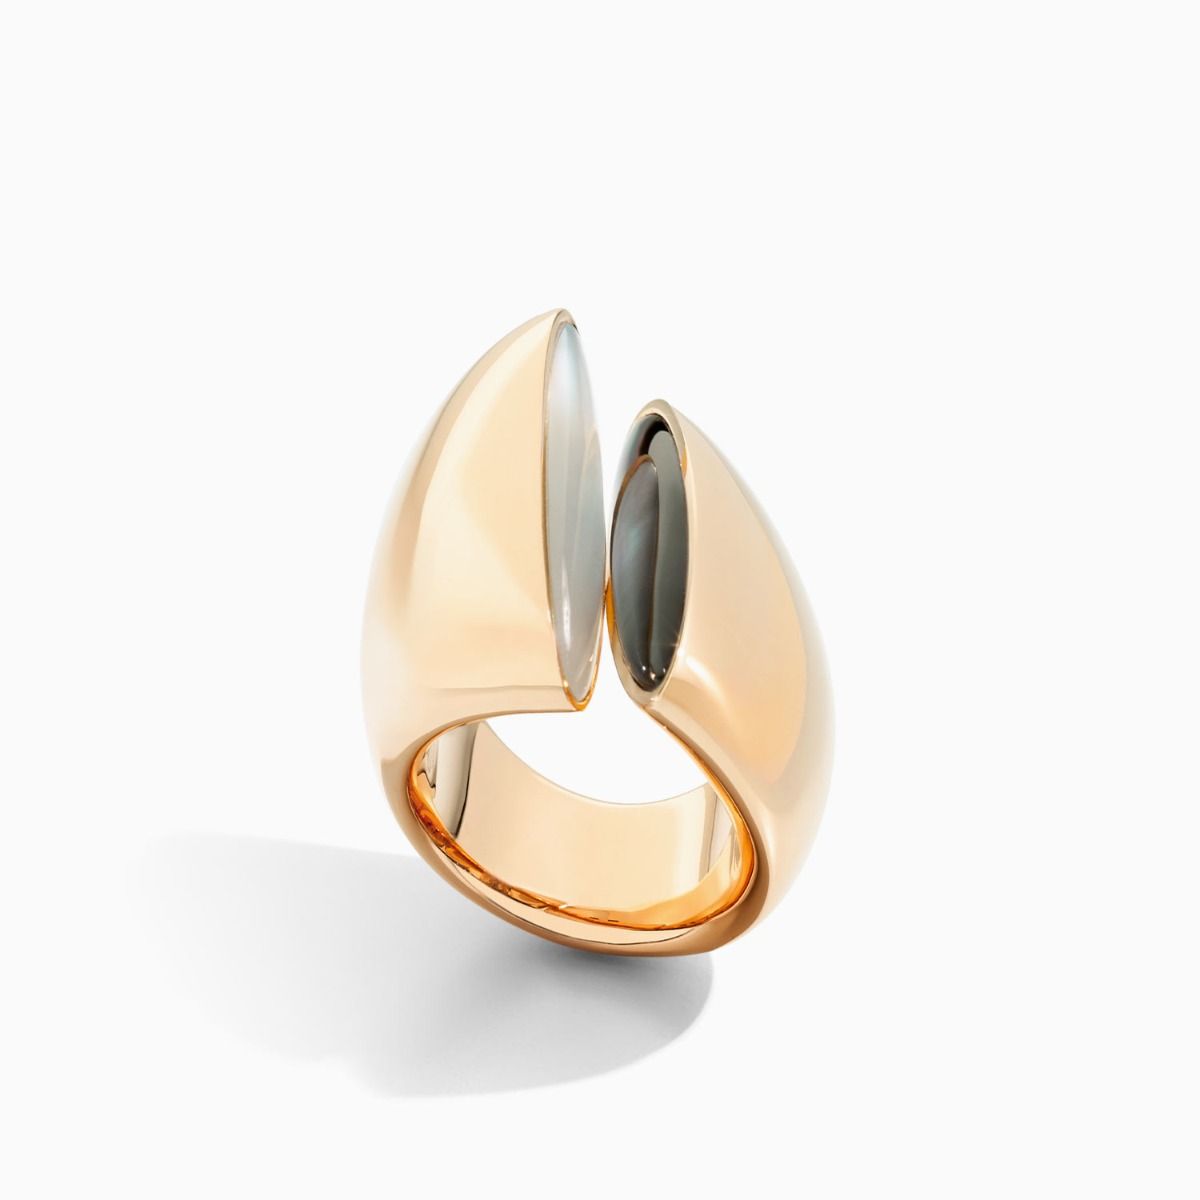 Vhernier eclisse ring in rose gold with mother of pearl